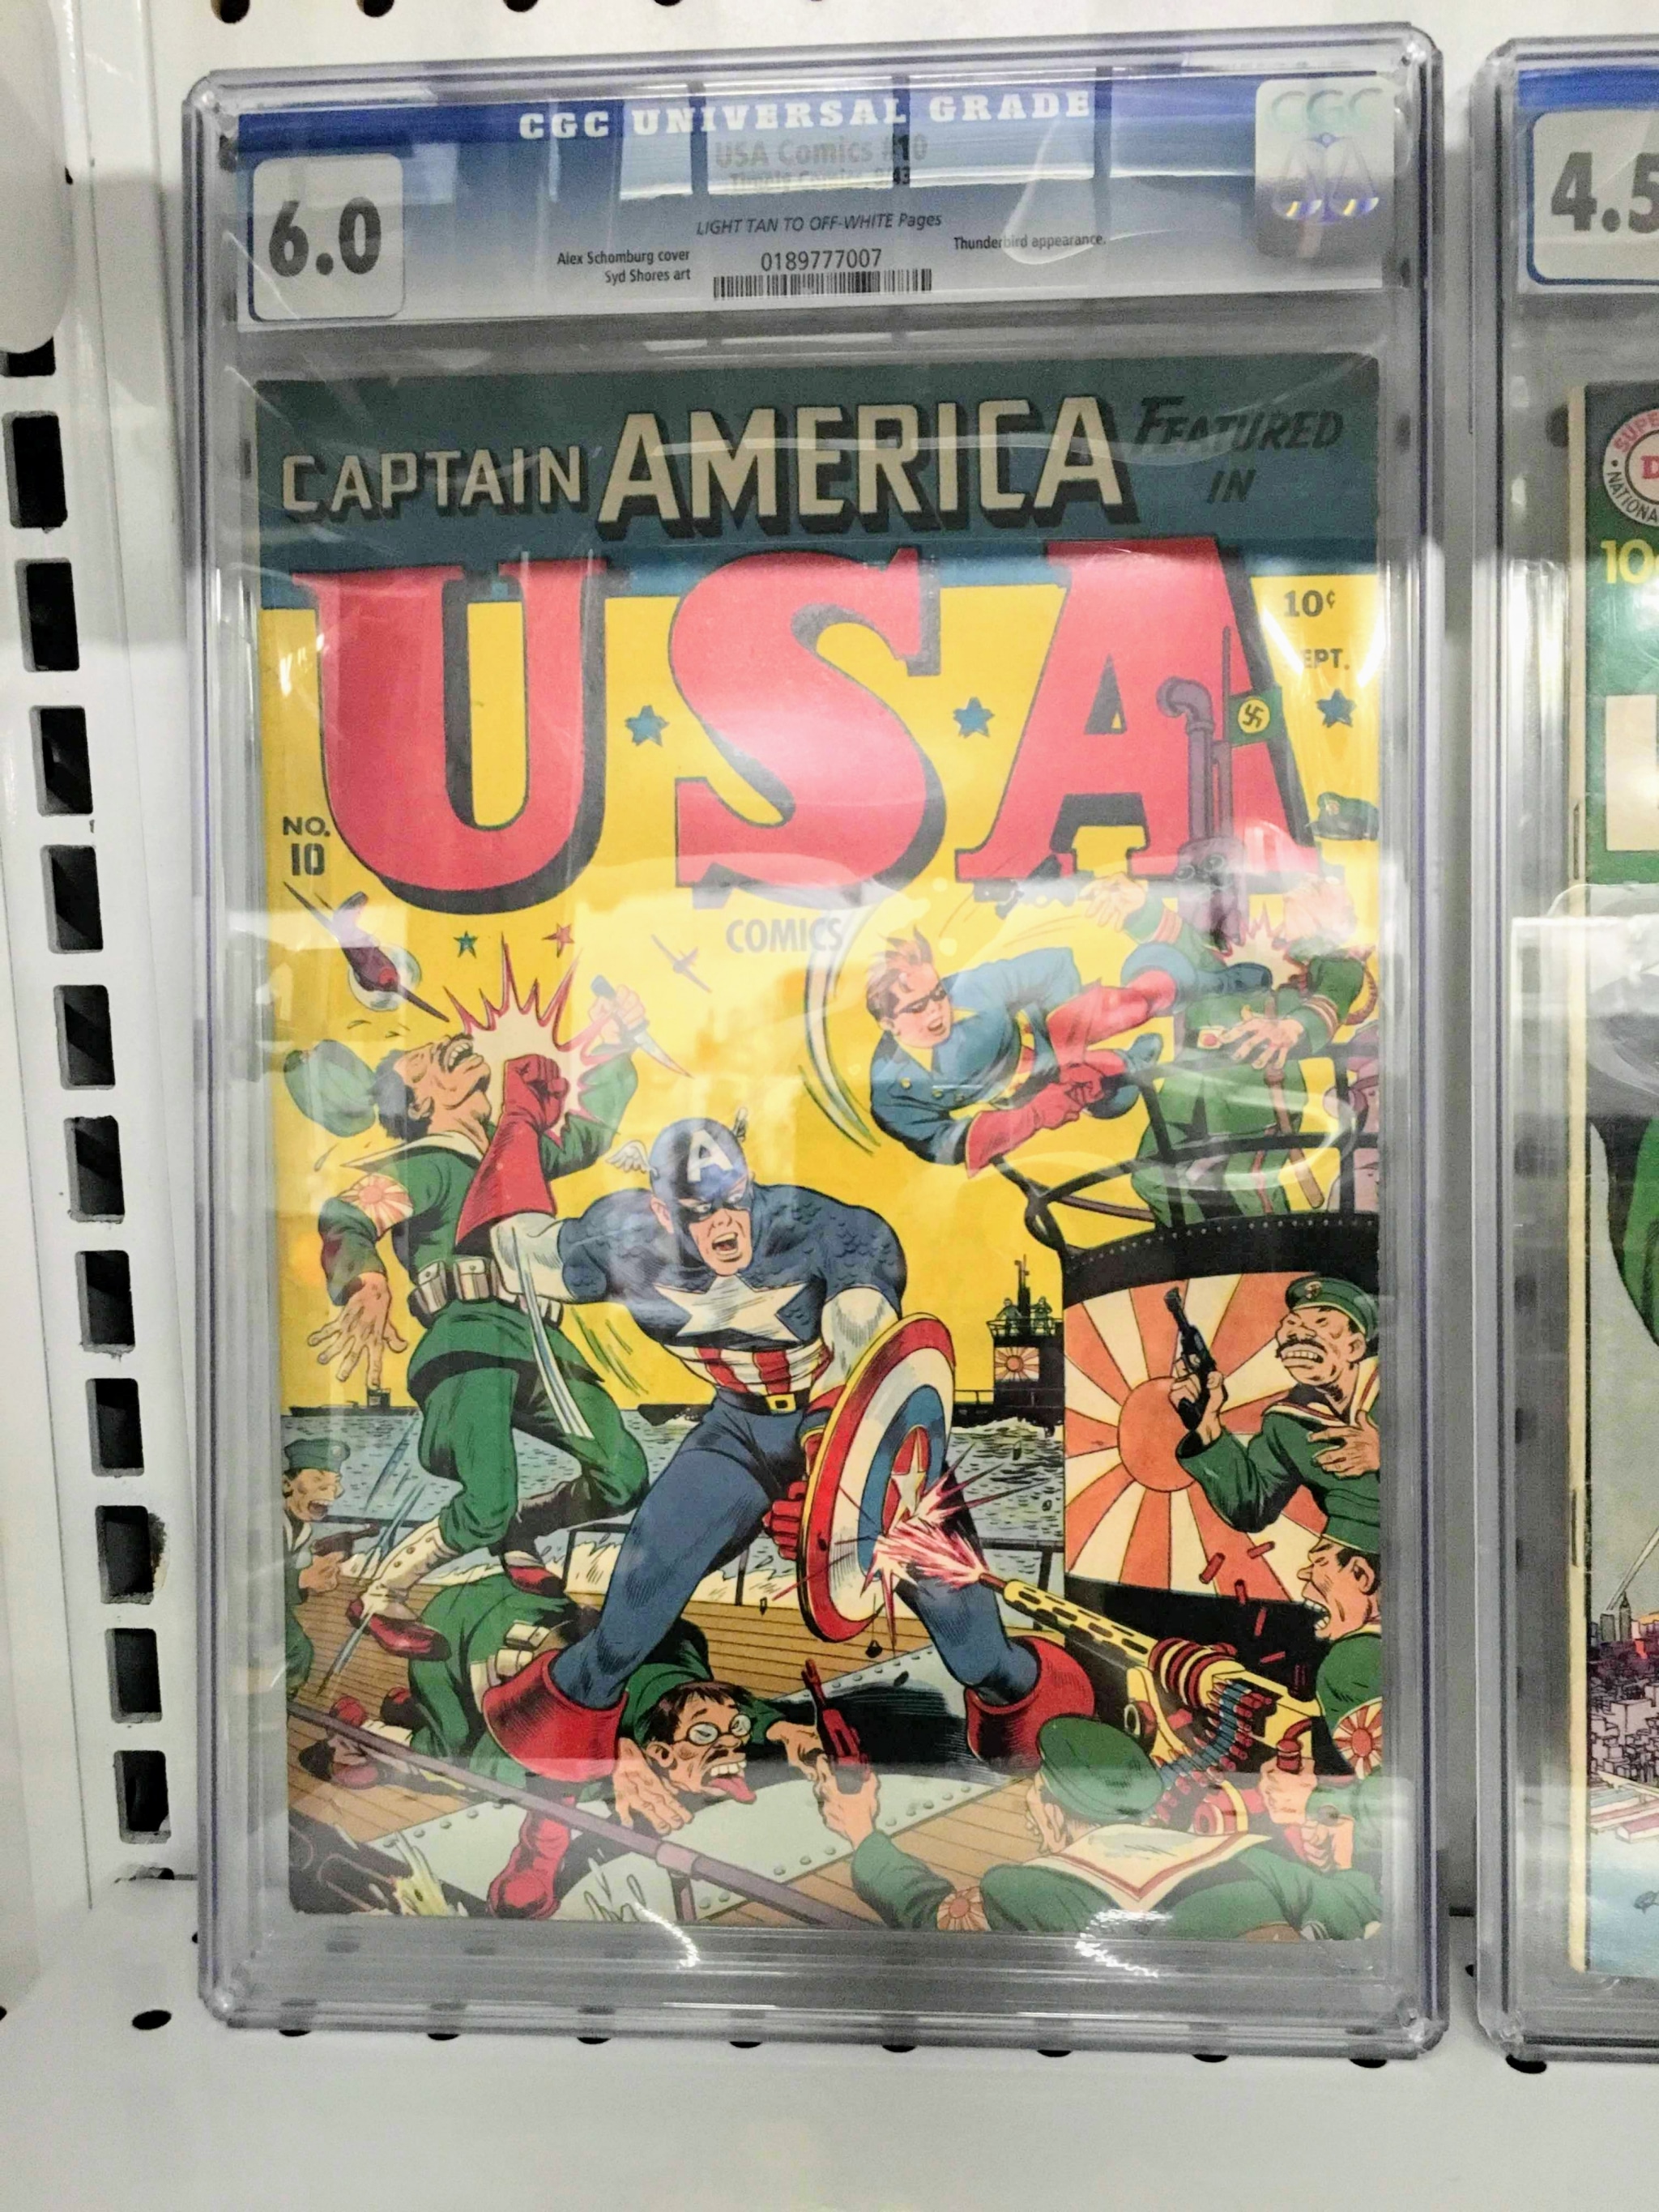 Legion is one of the Birmingham comic book stores where you can find rare comics.